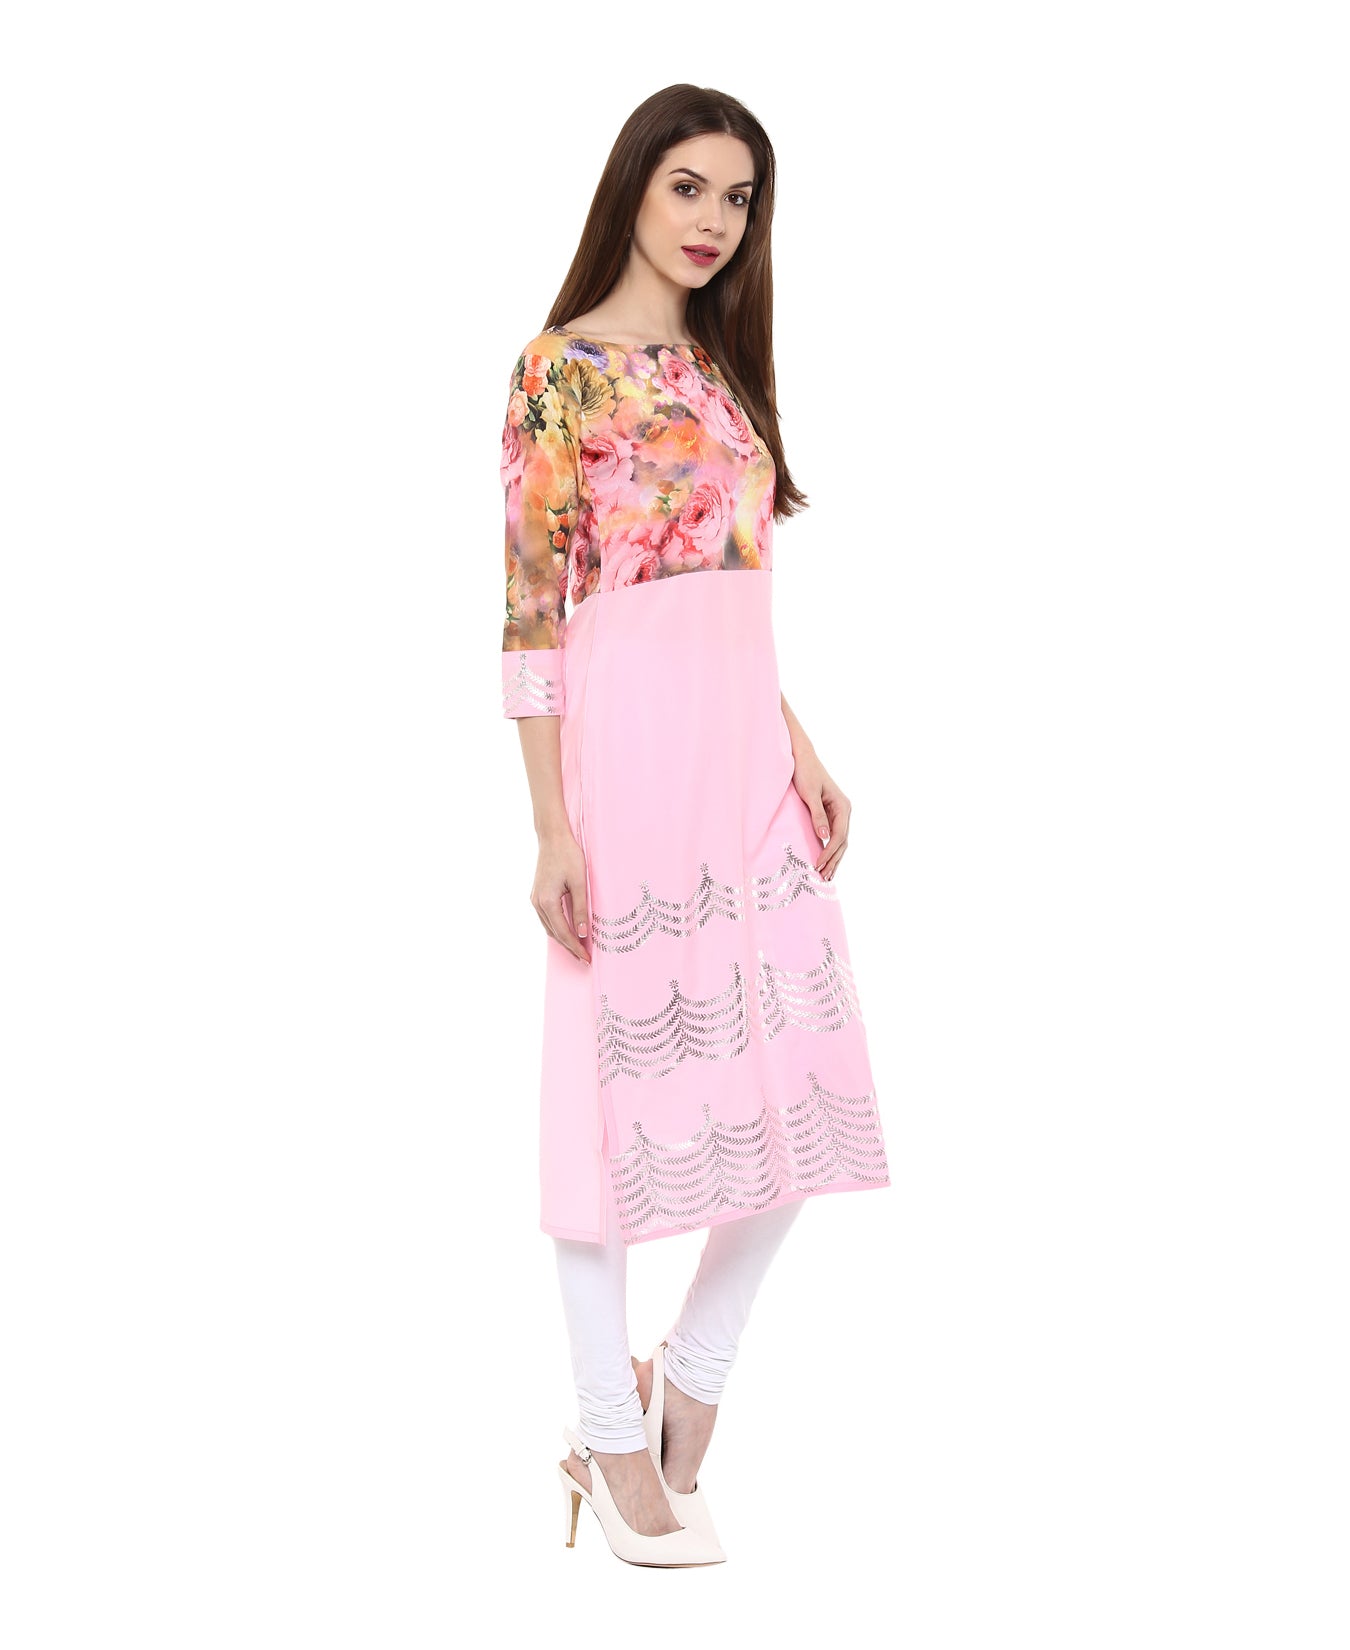 Women's Pink Floral And Metallic Printed Partywear Only Kurti - Ahalyaa